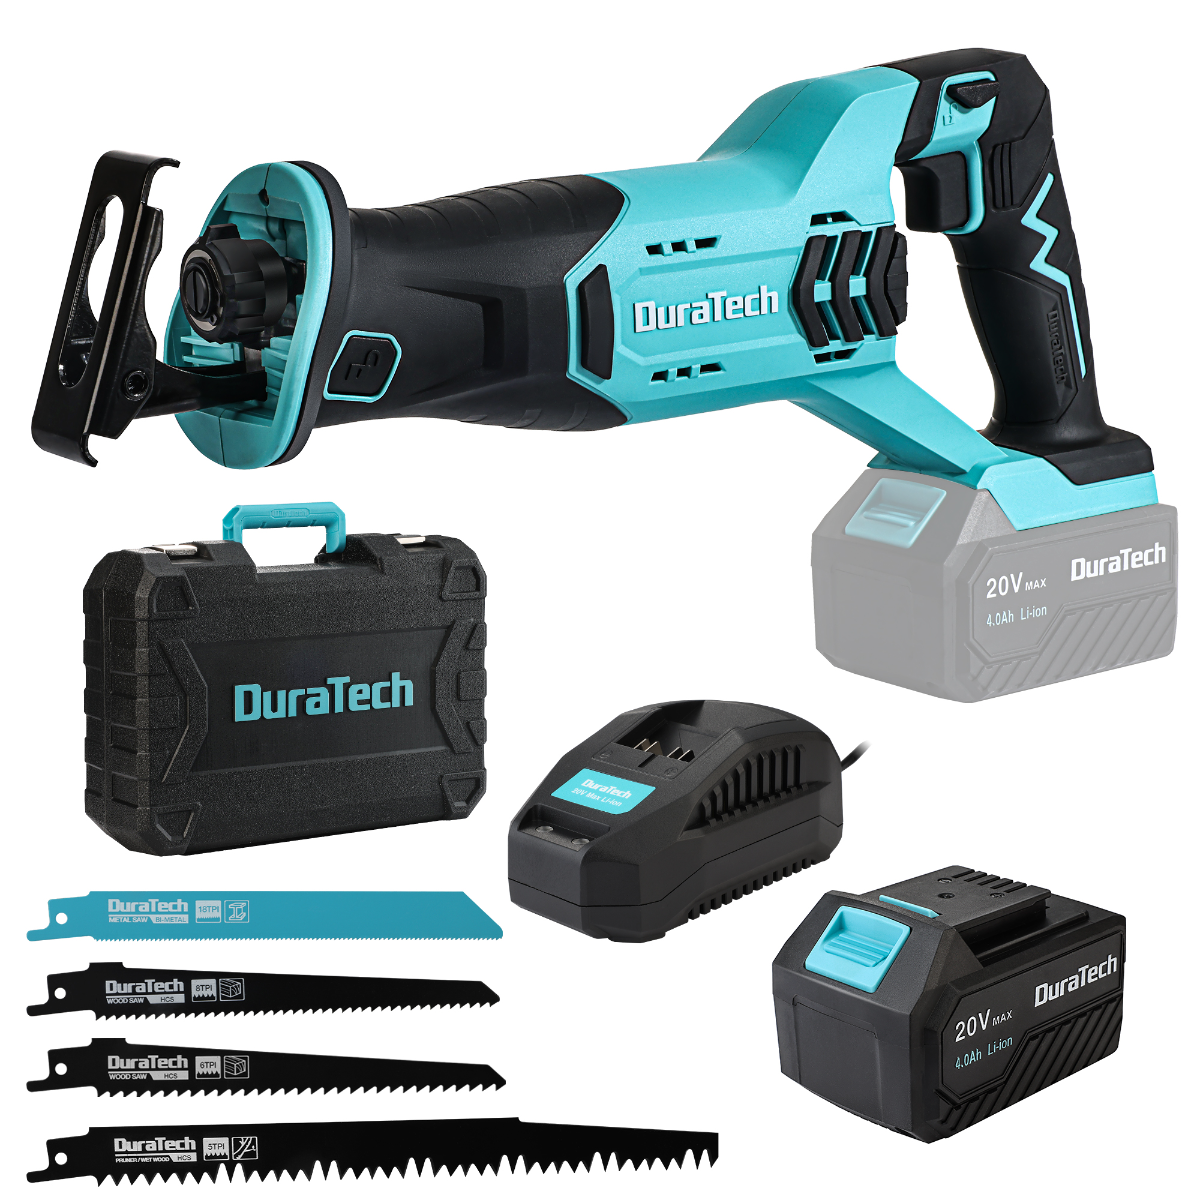 DURATECH 20V Cordless Reciprocating Saw